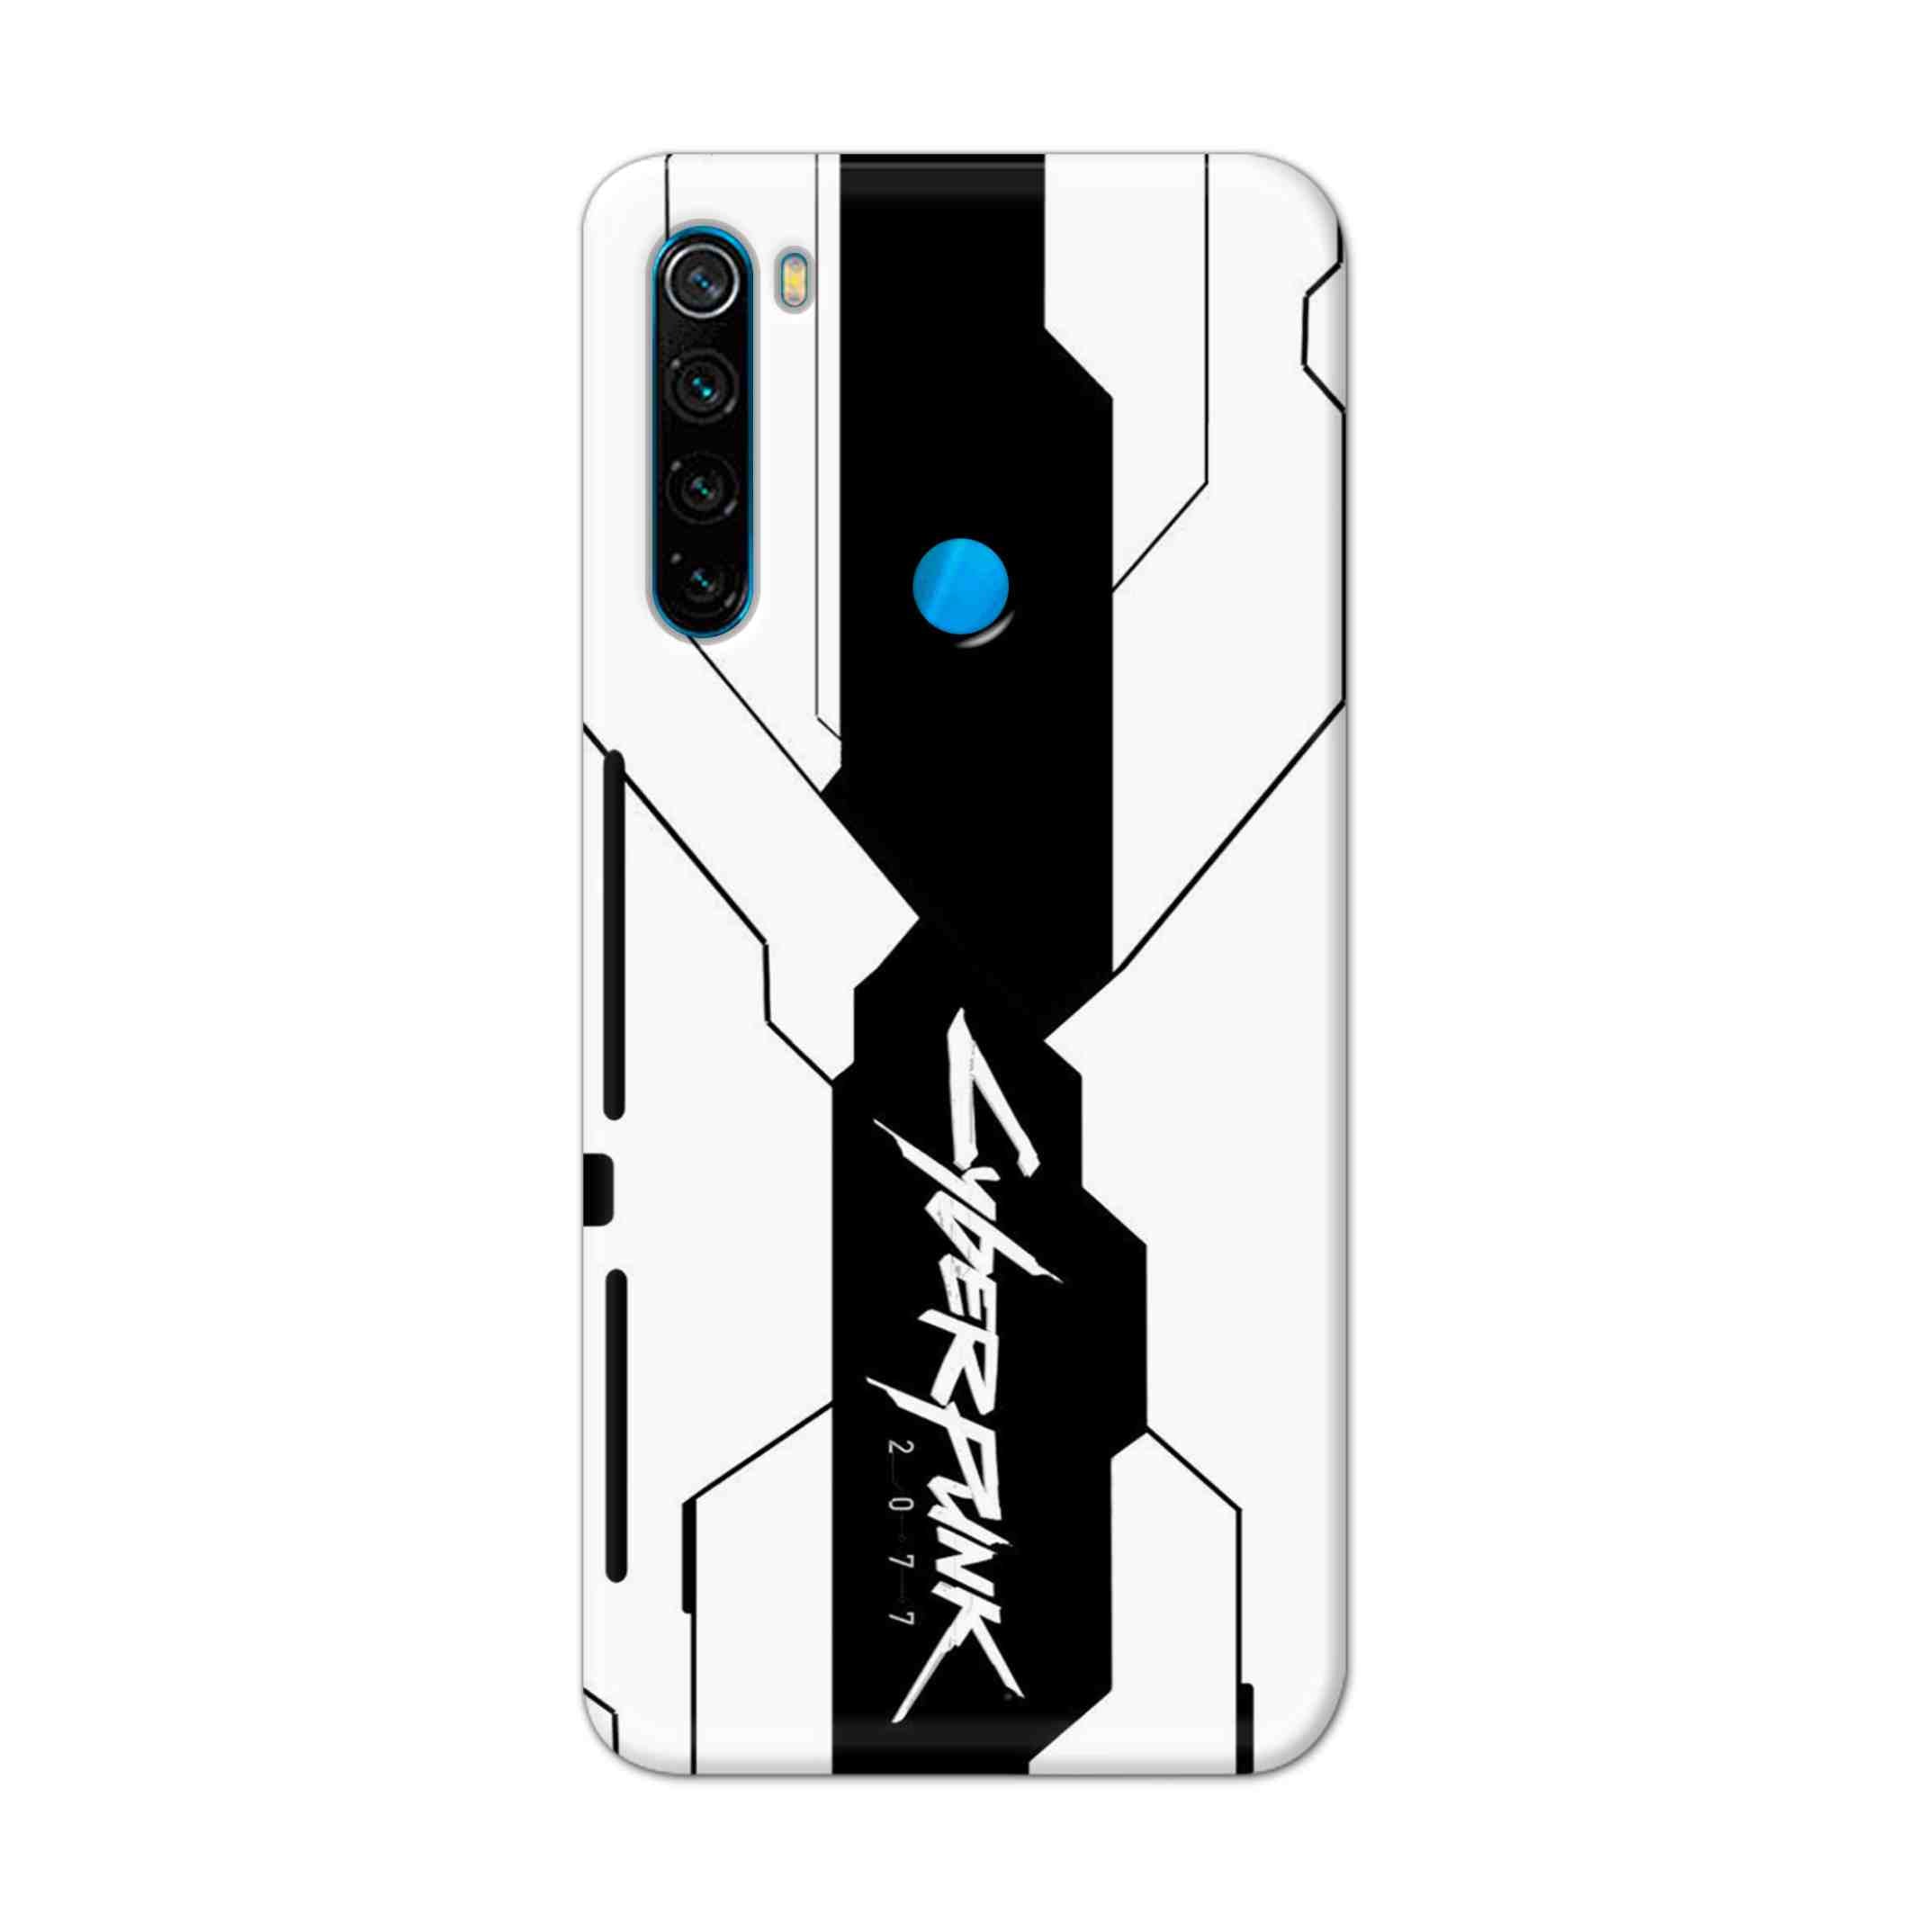 Buy Cyberpunk 2077 Hard Back Mobile Phone Case Cover For Xiaomi Redmi Note 8 Online